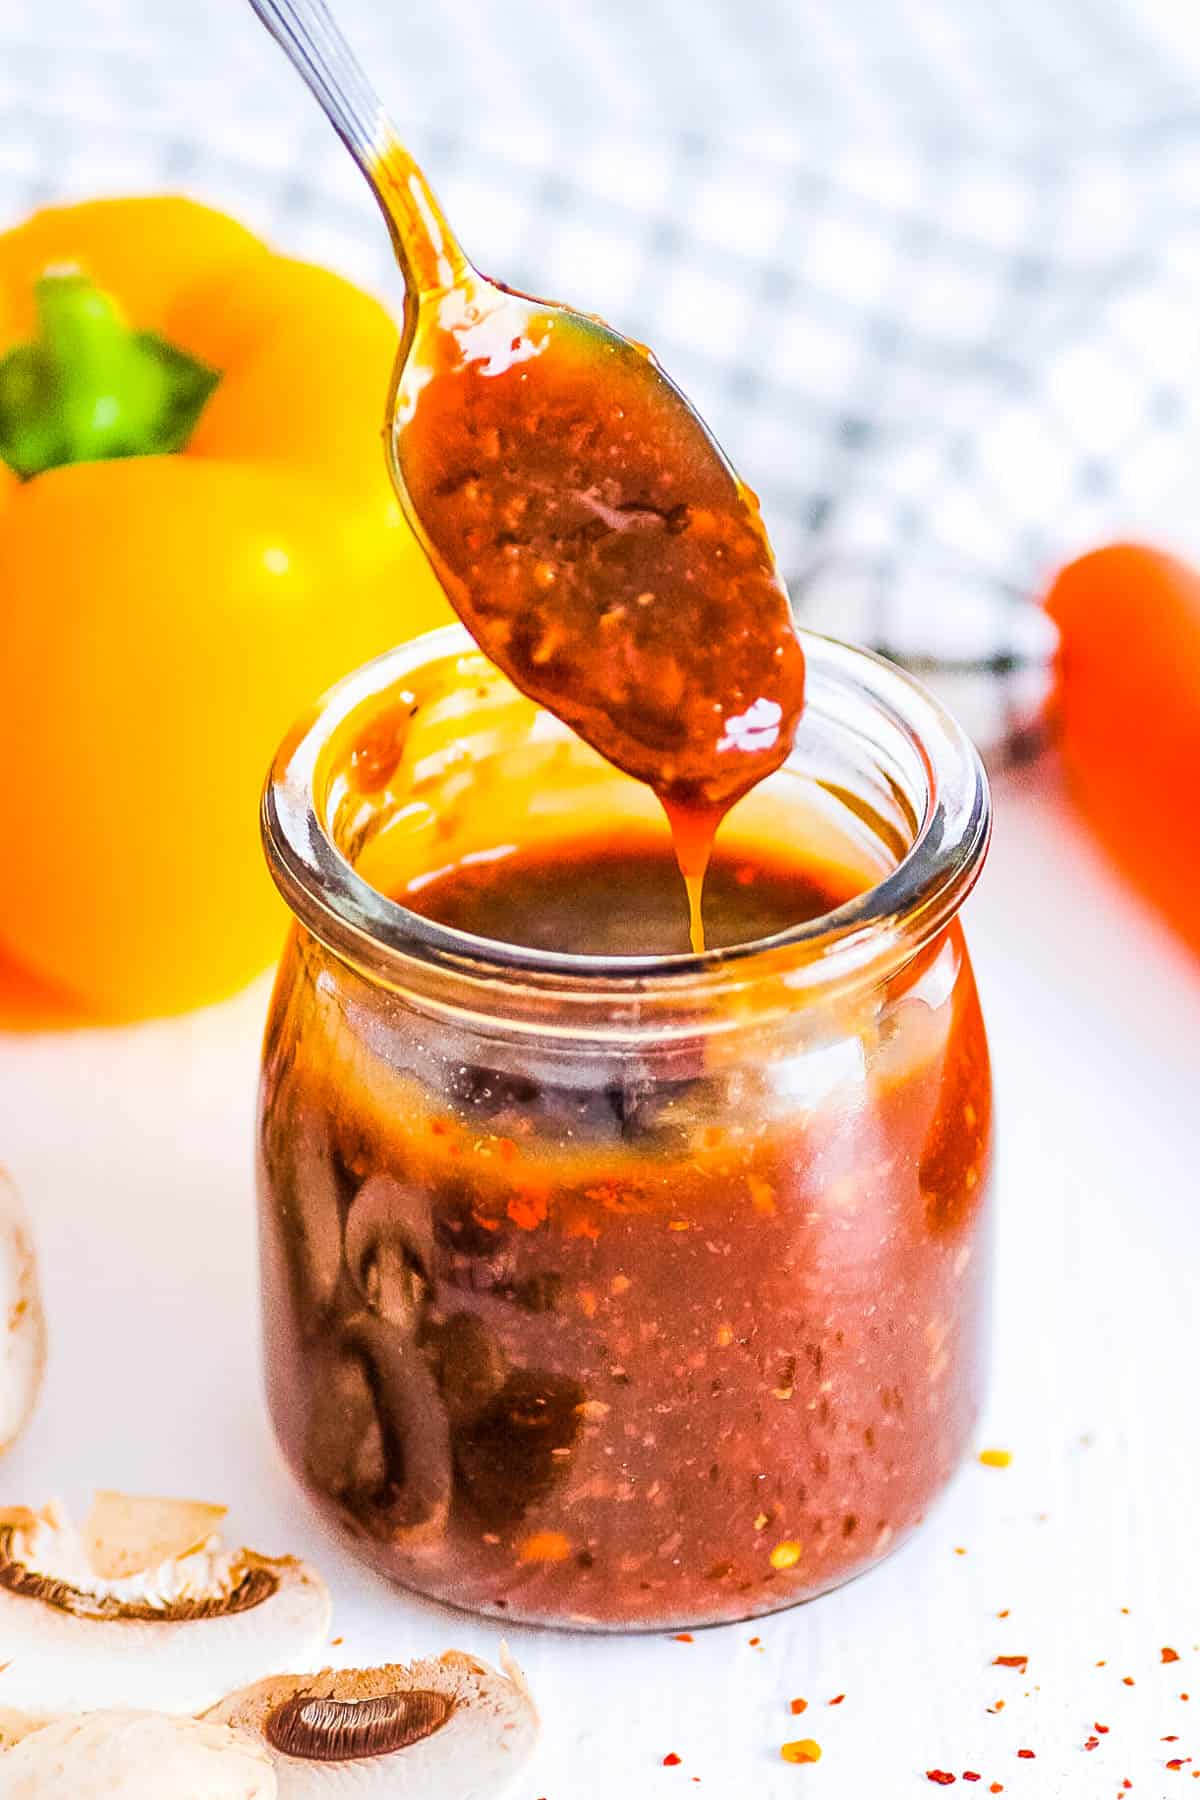 Gluten free stir fry sauce stored in a glass jar with a spoon.